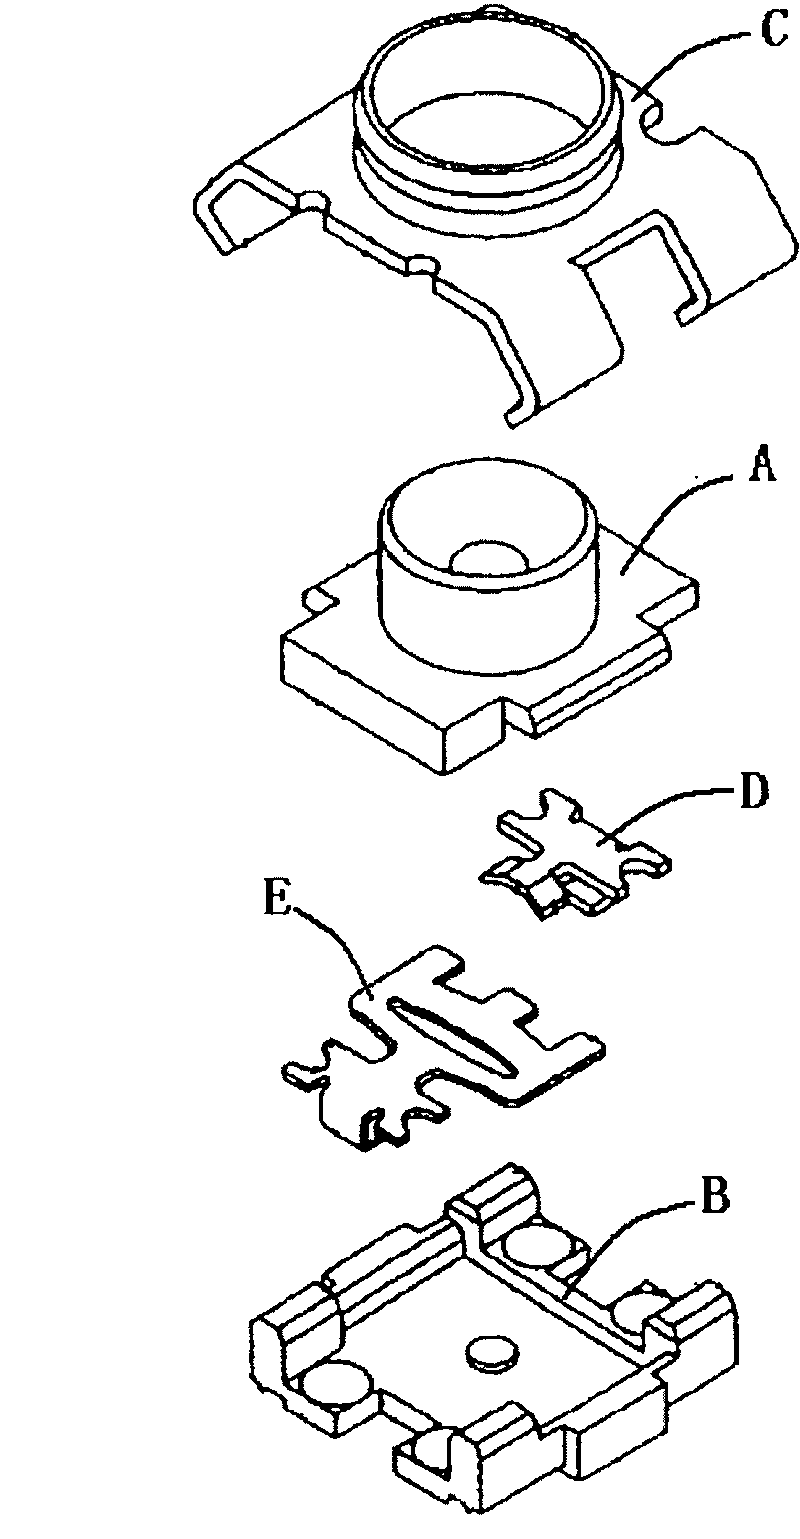 Coaxial electric connector with special terminal structure